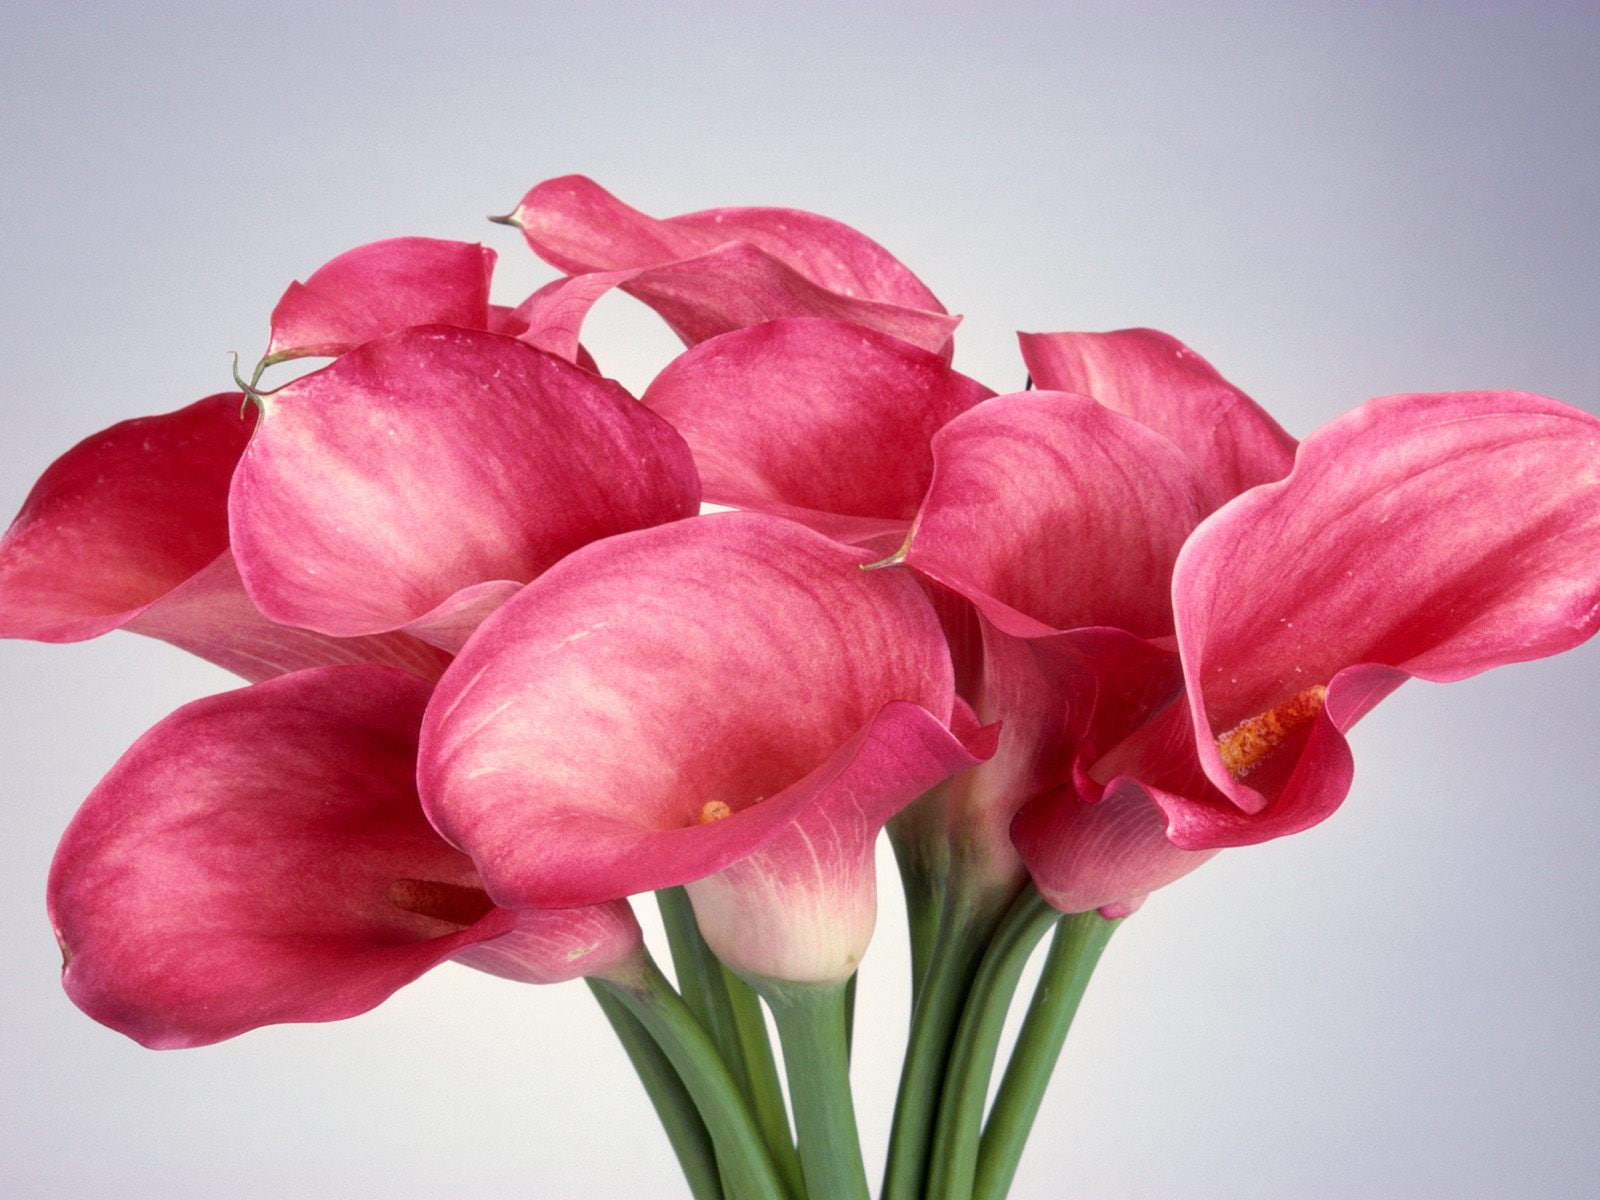 Calla Lilies, red petaled flowers